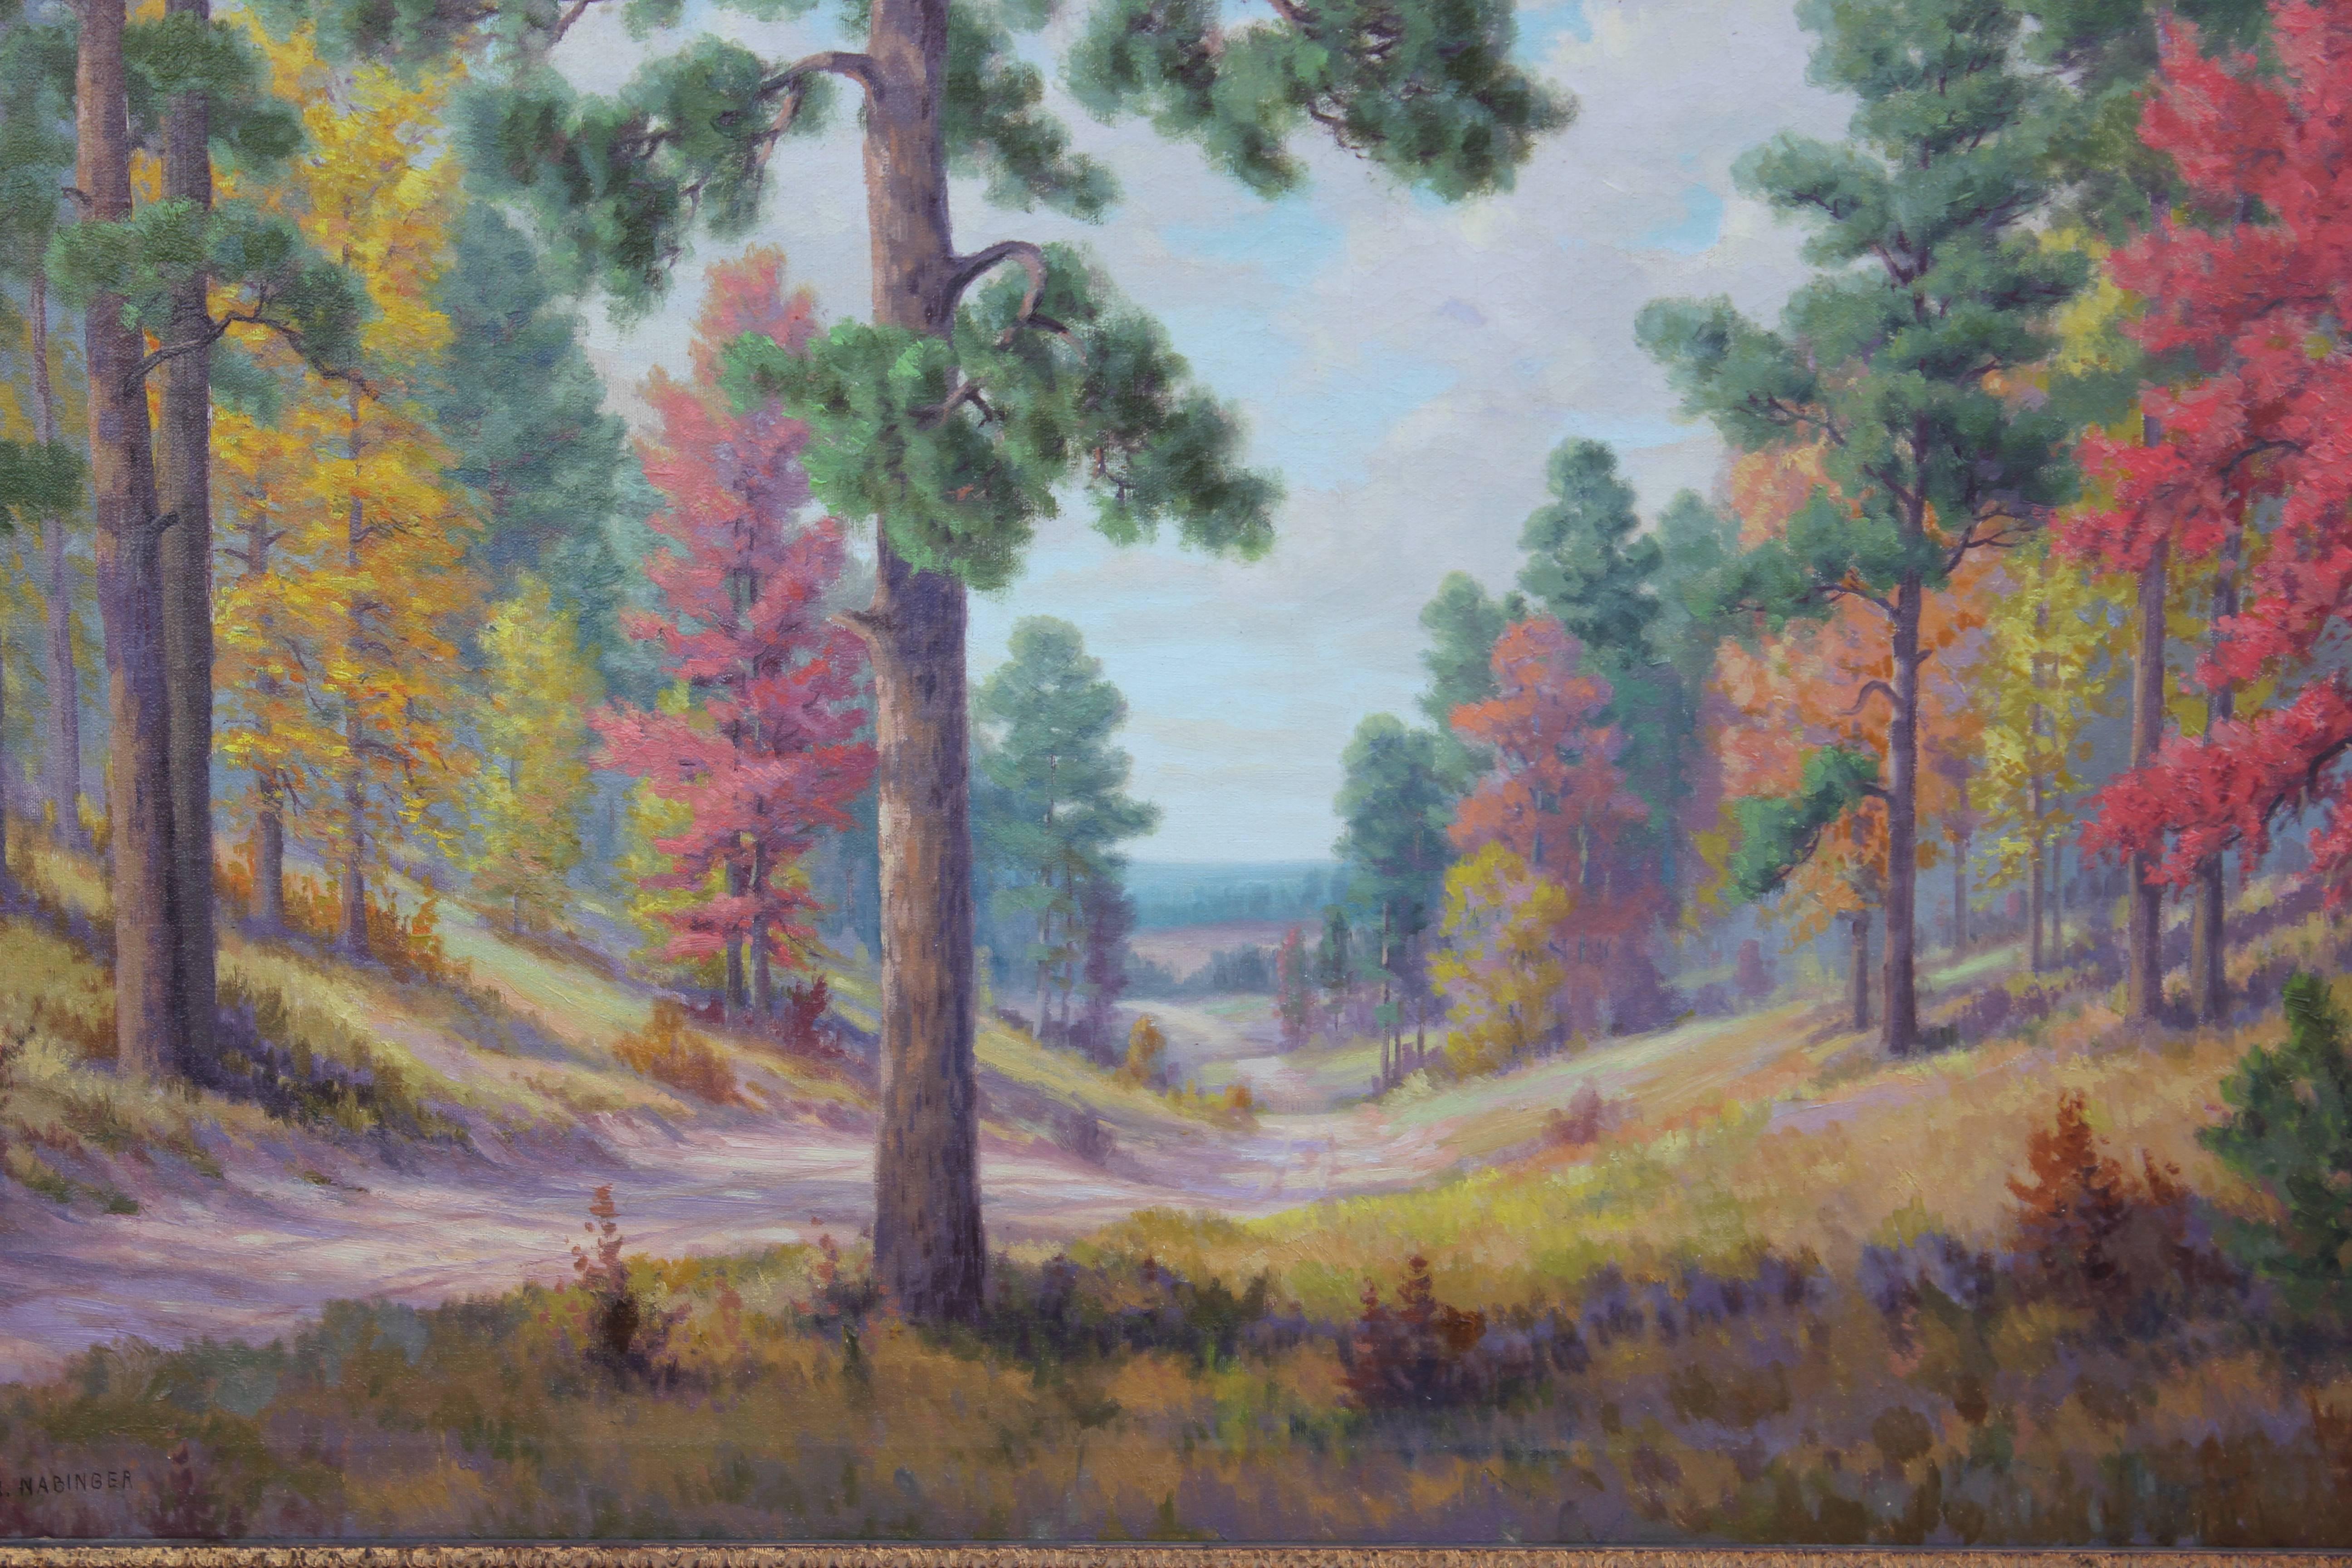 Idealistic Fall Texas Landscape - Painting by Dollie Nabinger